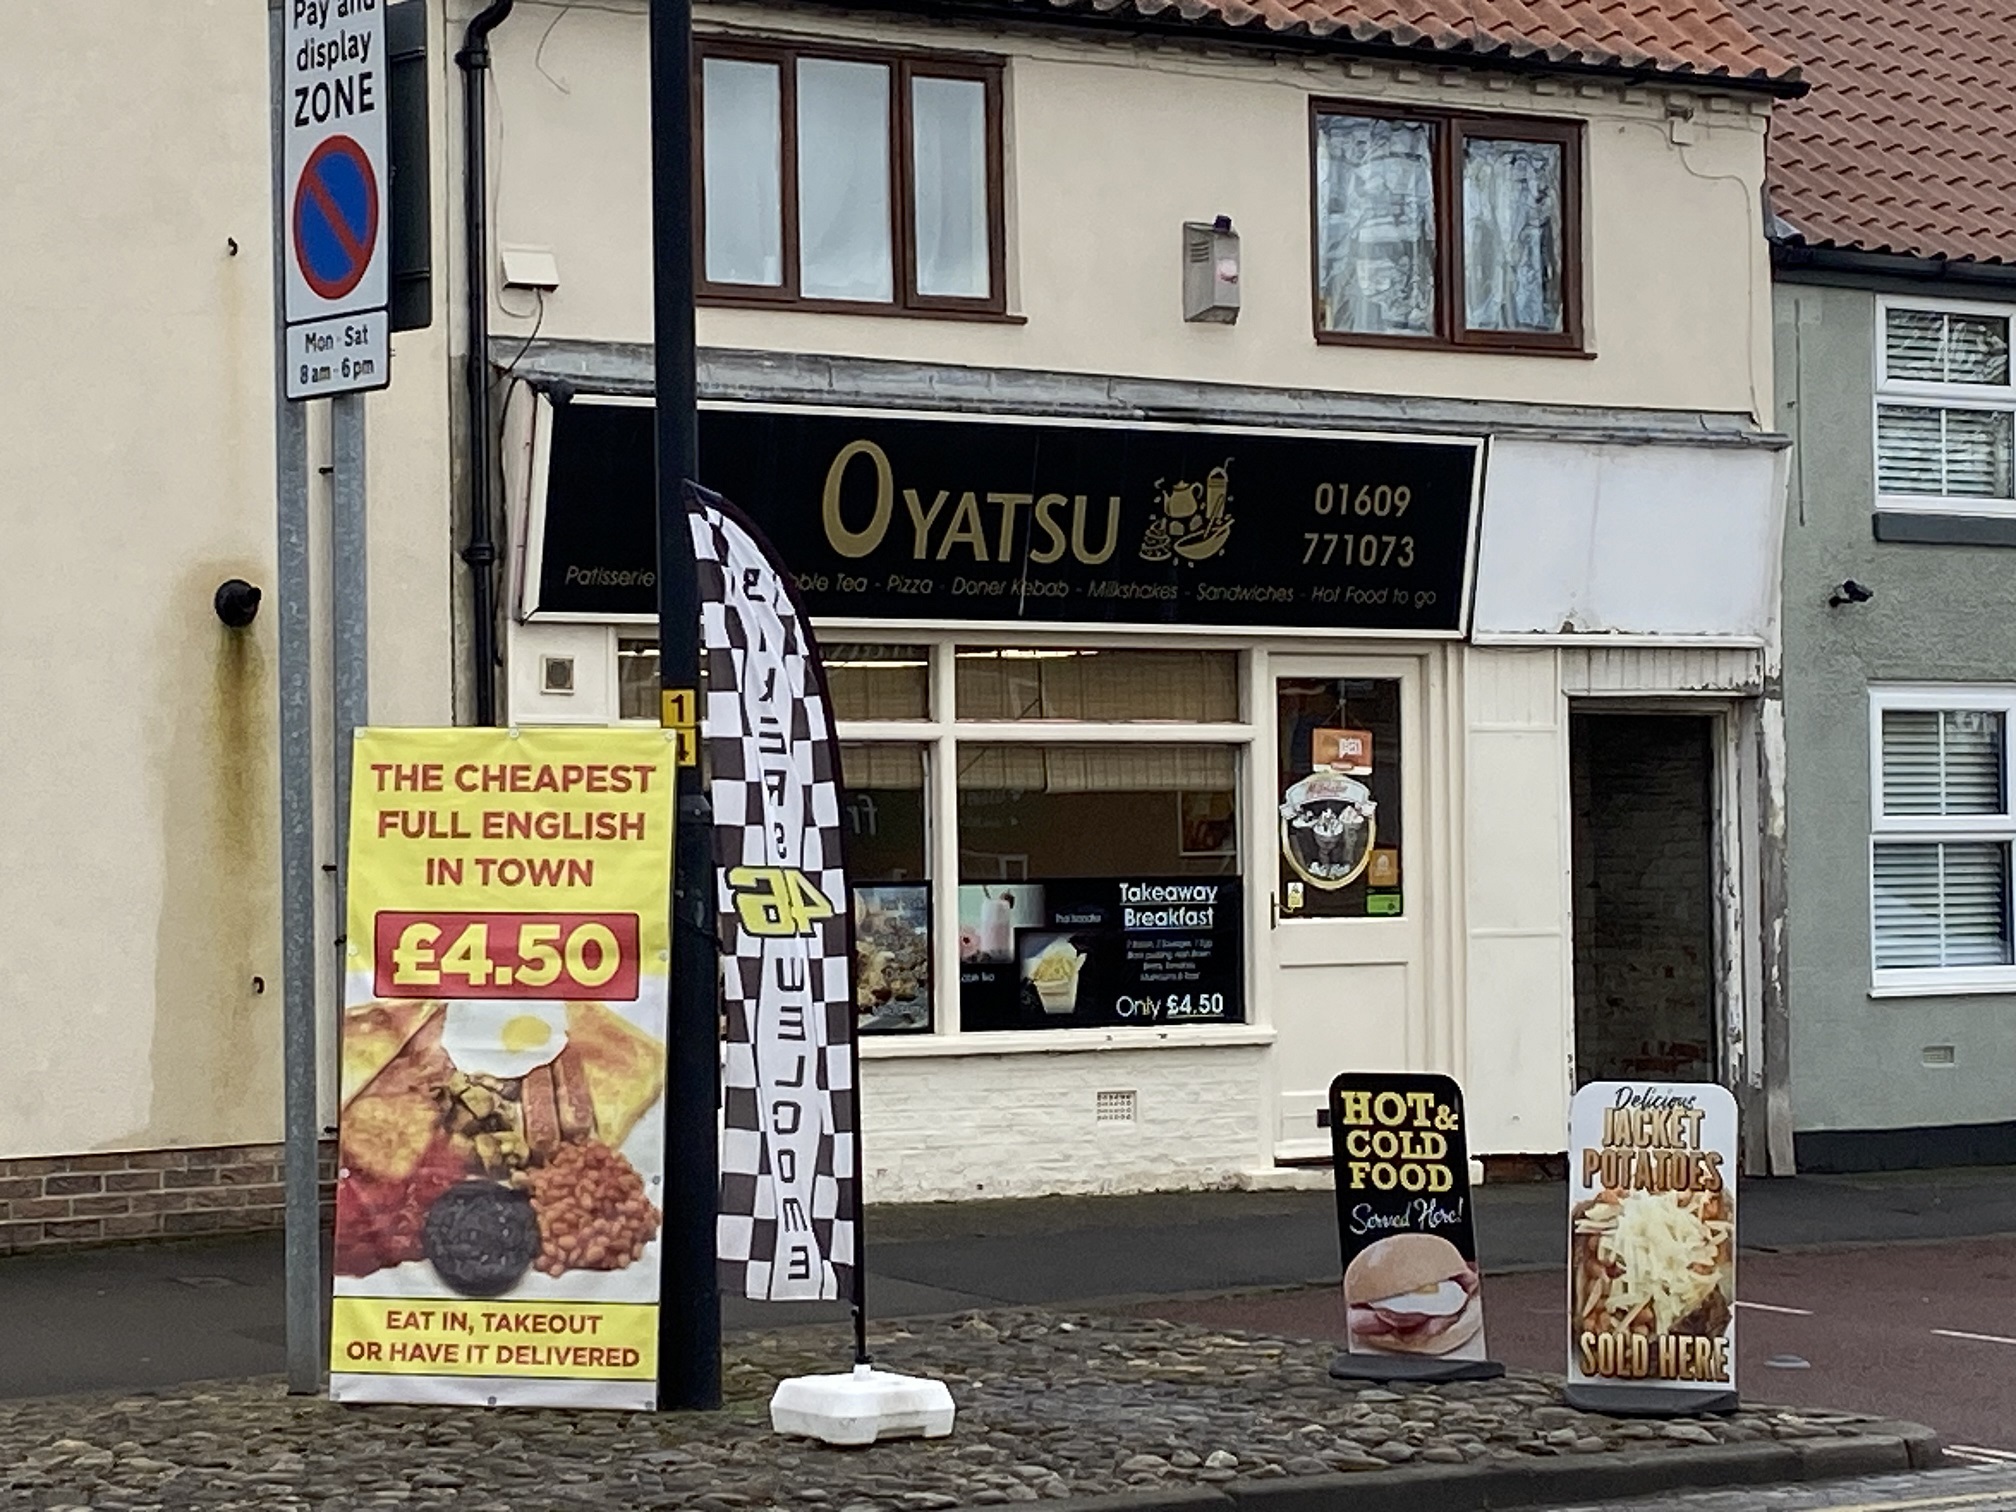 Oyatsu café says it offers the cheapest full English in town